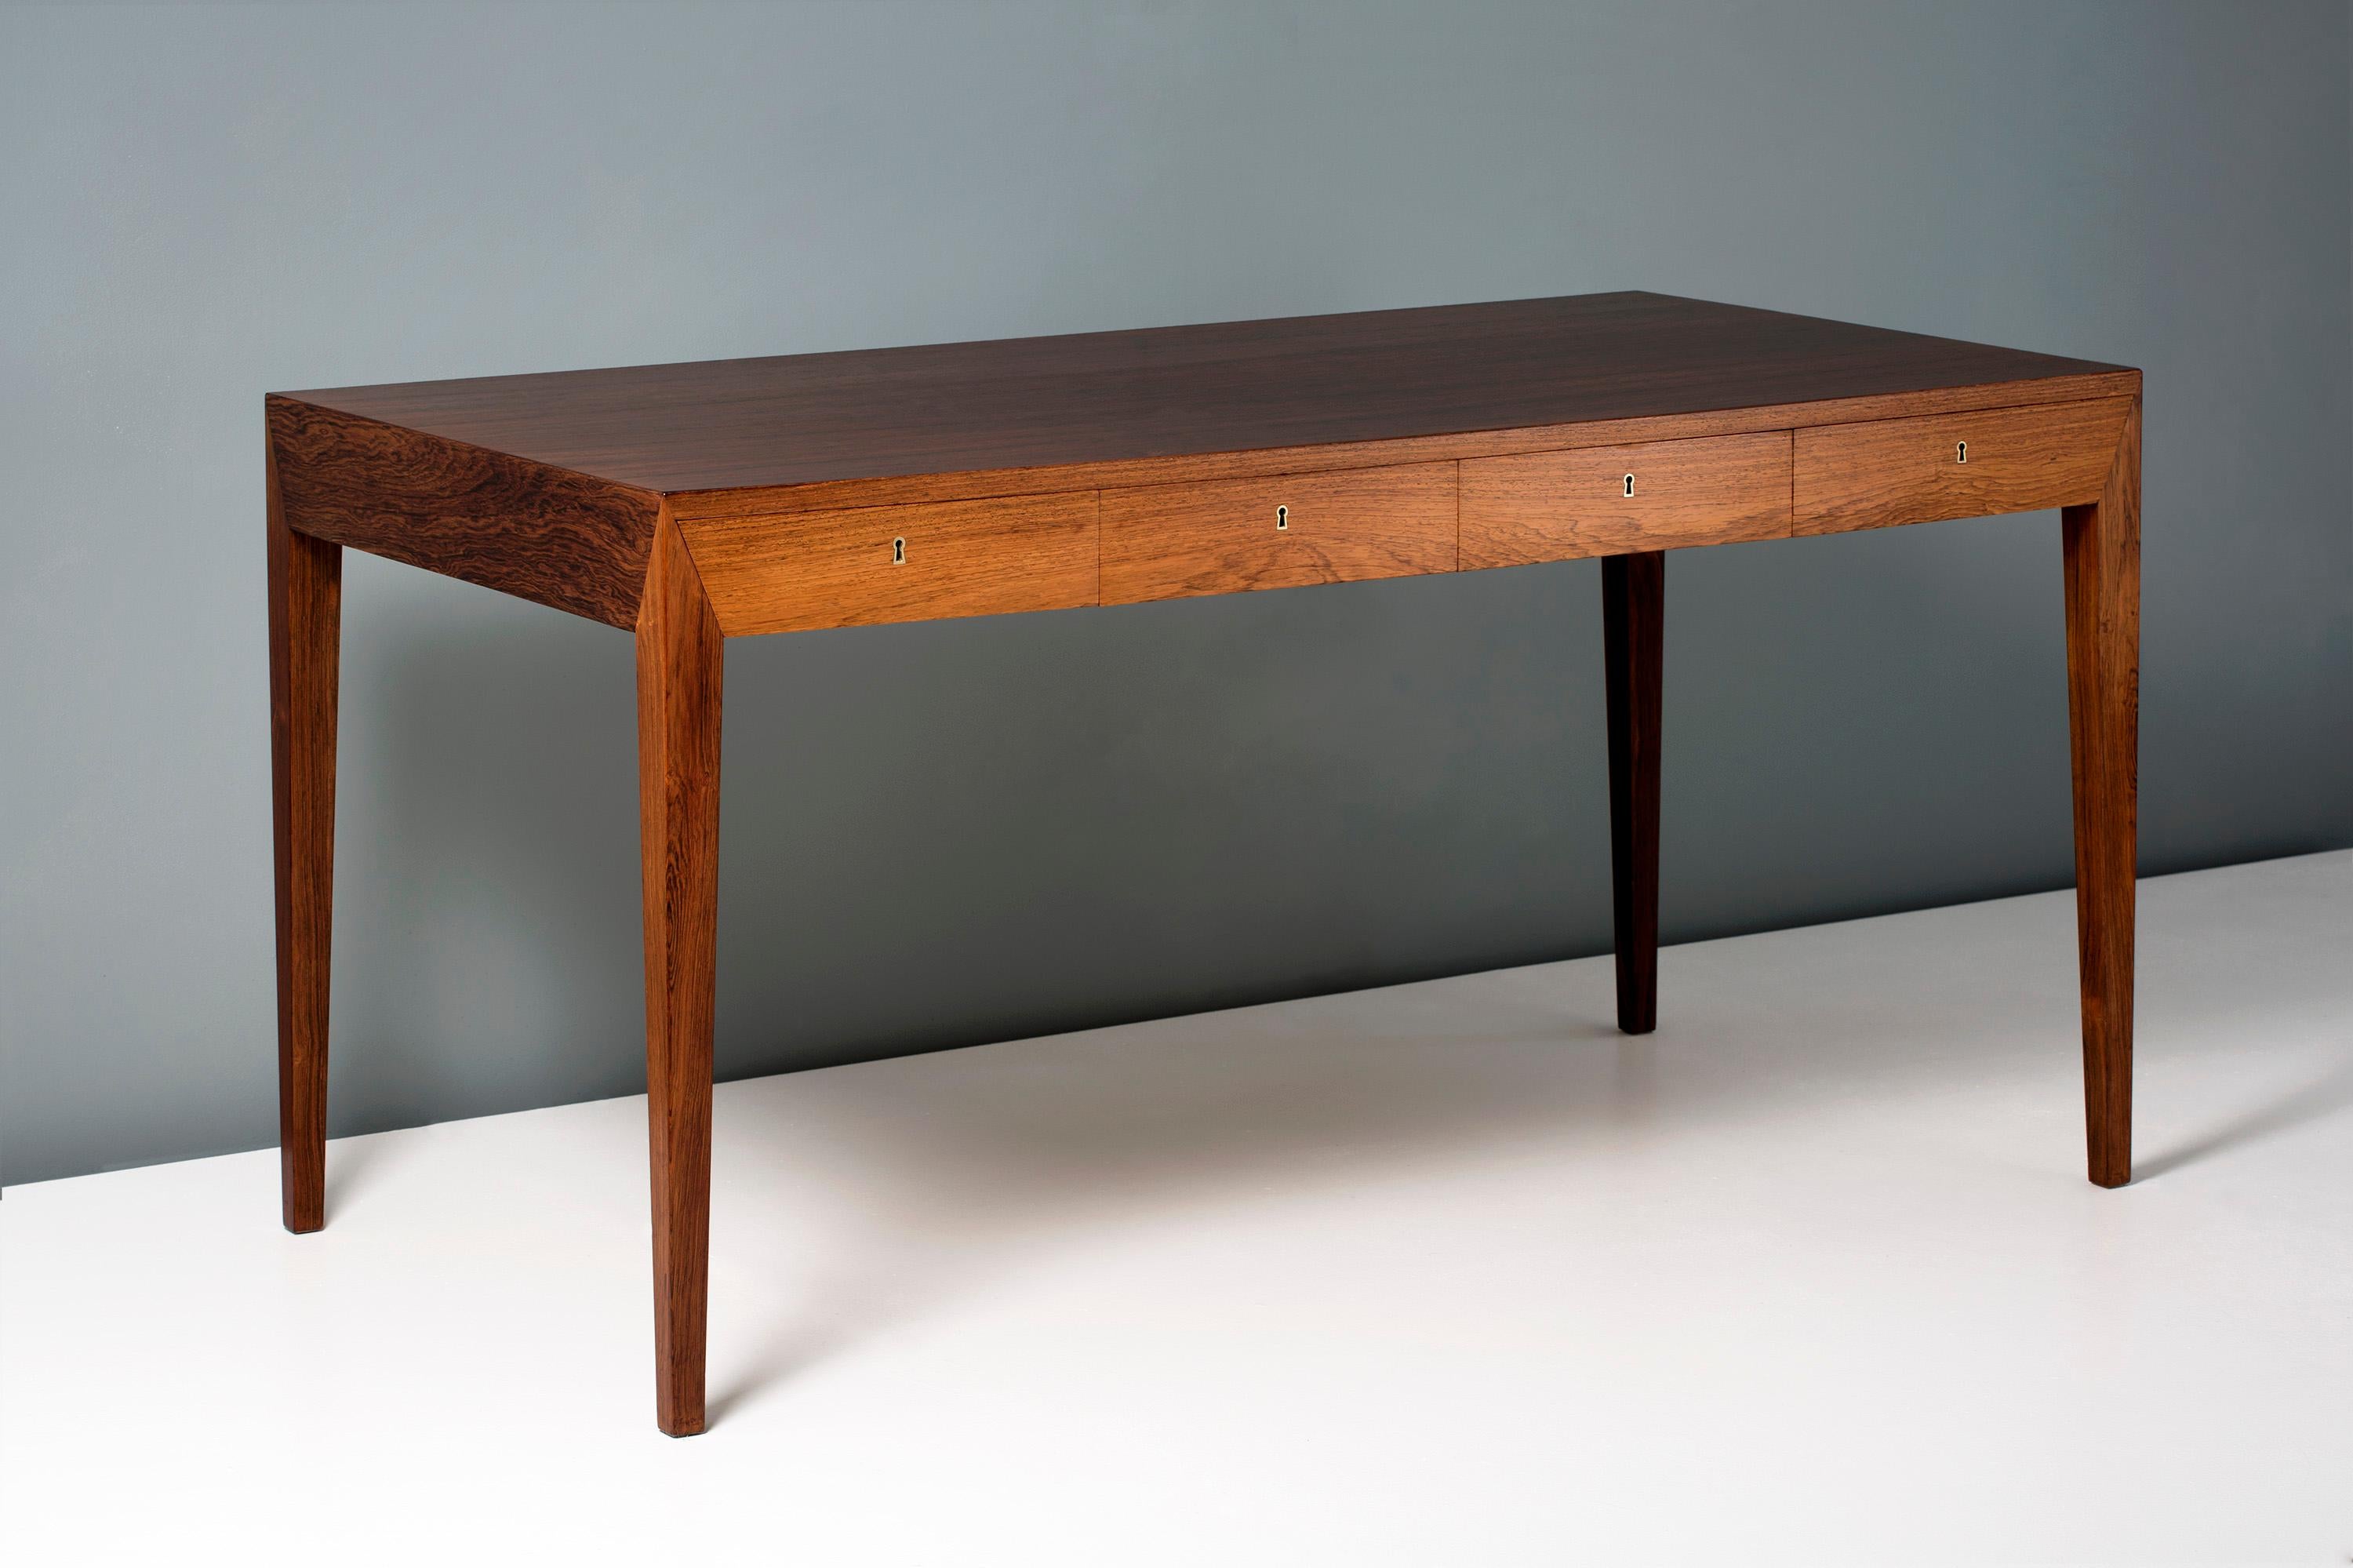 Severin Hansen Jnr.

Writing desk, circa 1950s.

This iconic piece of Danish design was produced by Haslev Mobelsnedkeri in Denmark in the late 1950s. The desk is made from solid and veneered Brazilian rosewood with brass fittings in 4 integral